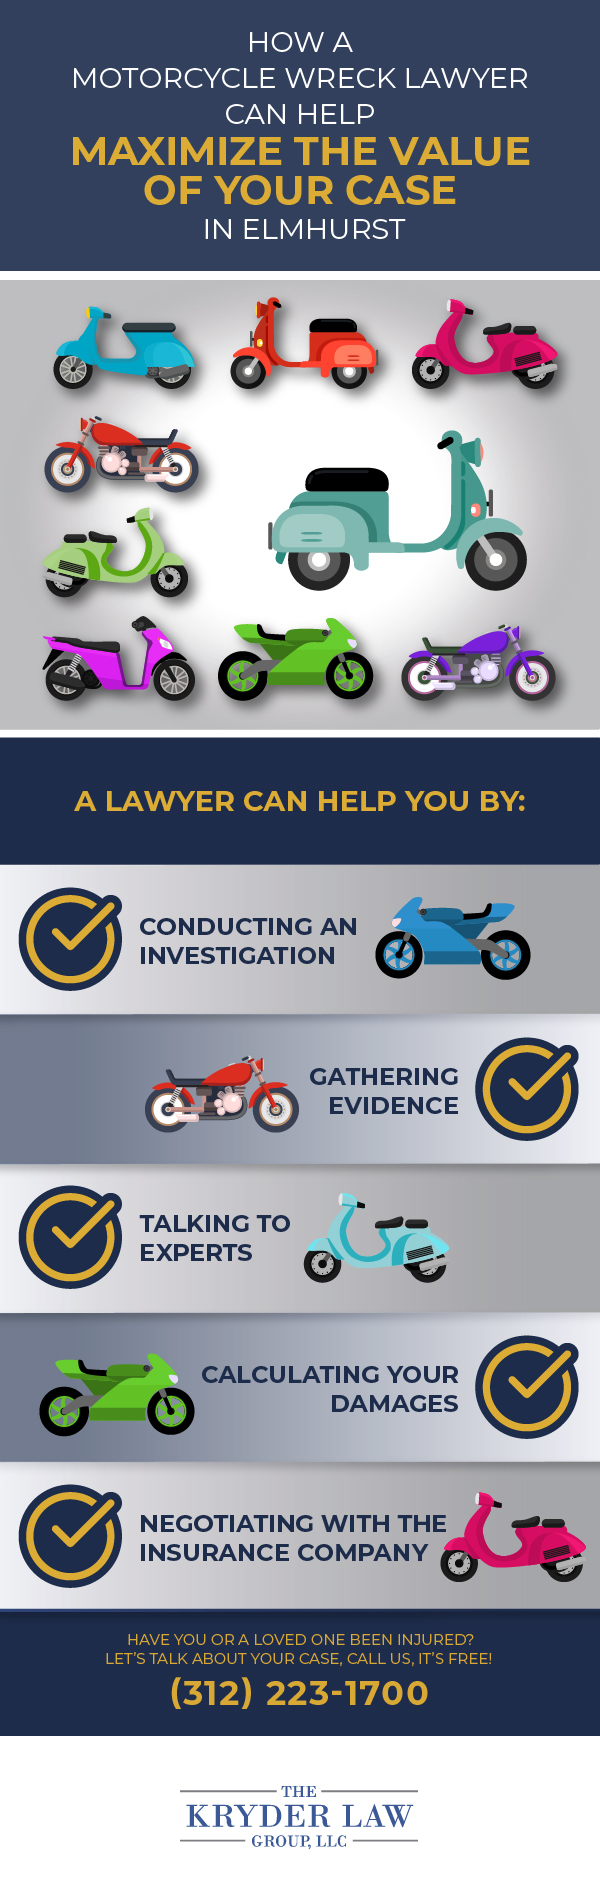 How a Motorcycle Wreck Lawyer Can Help Maximize the Value of Your Case in Elmhurst Infographic